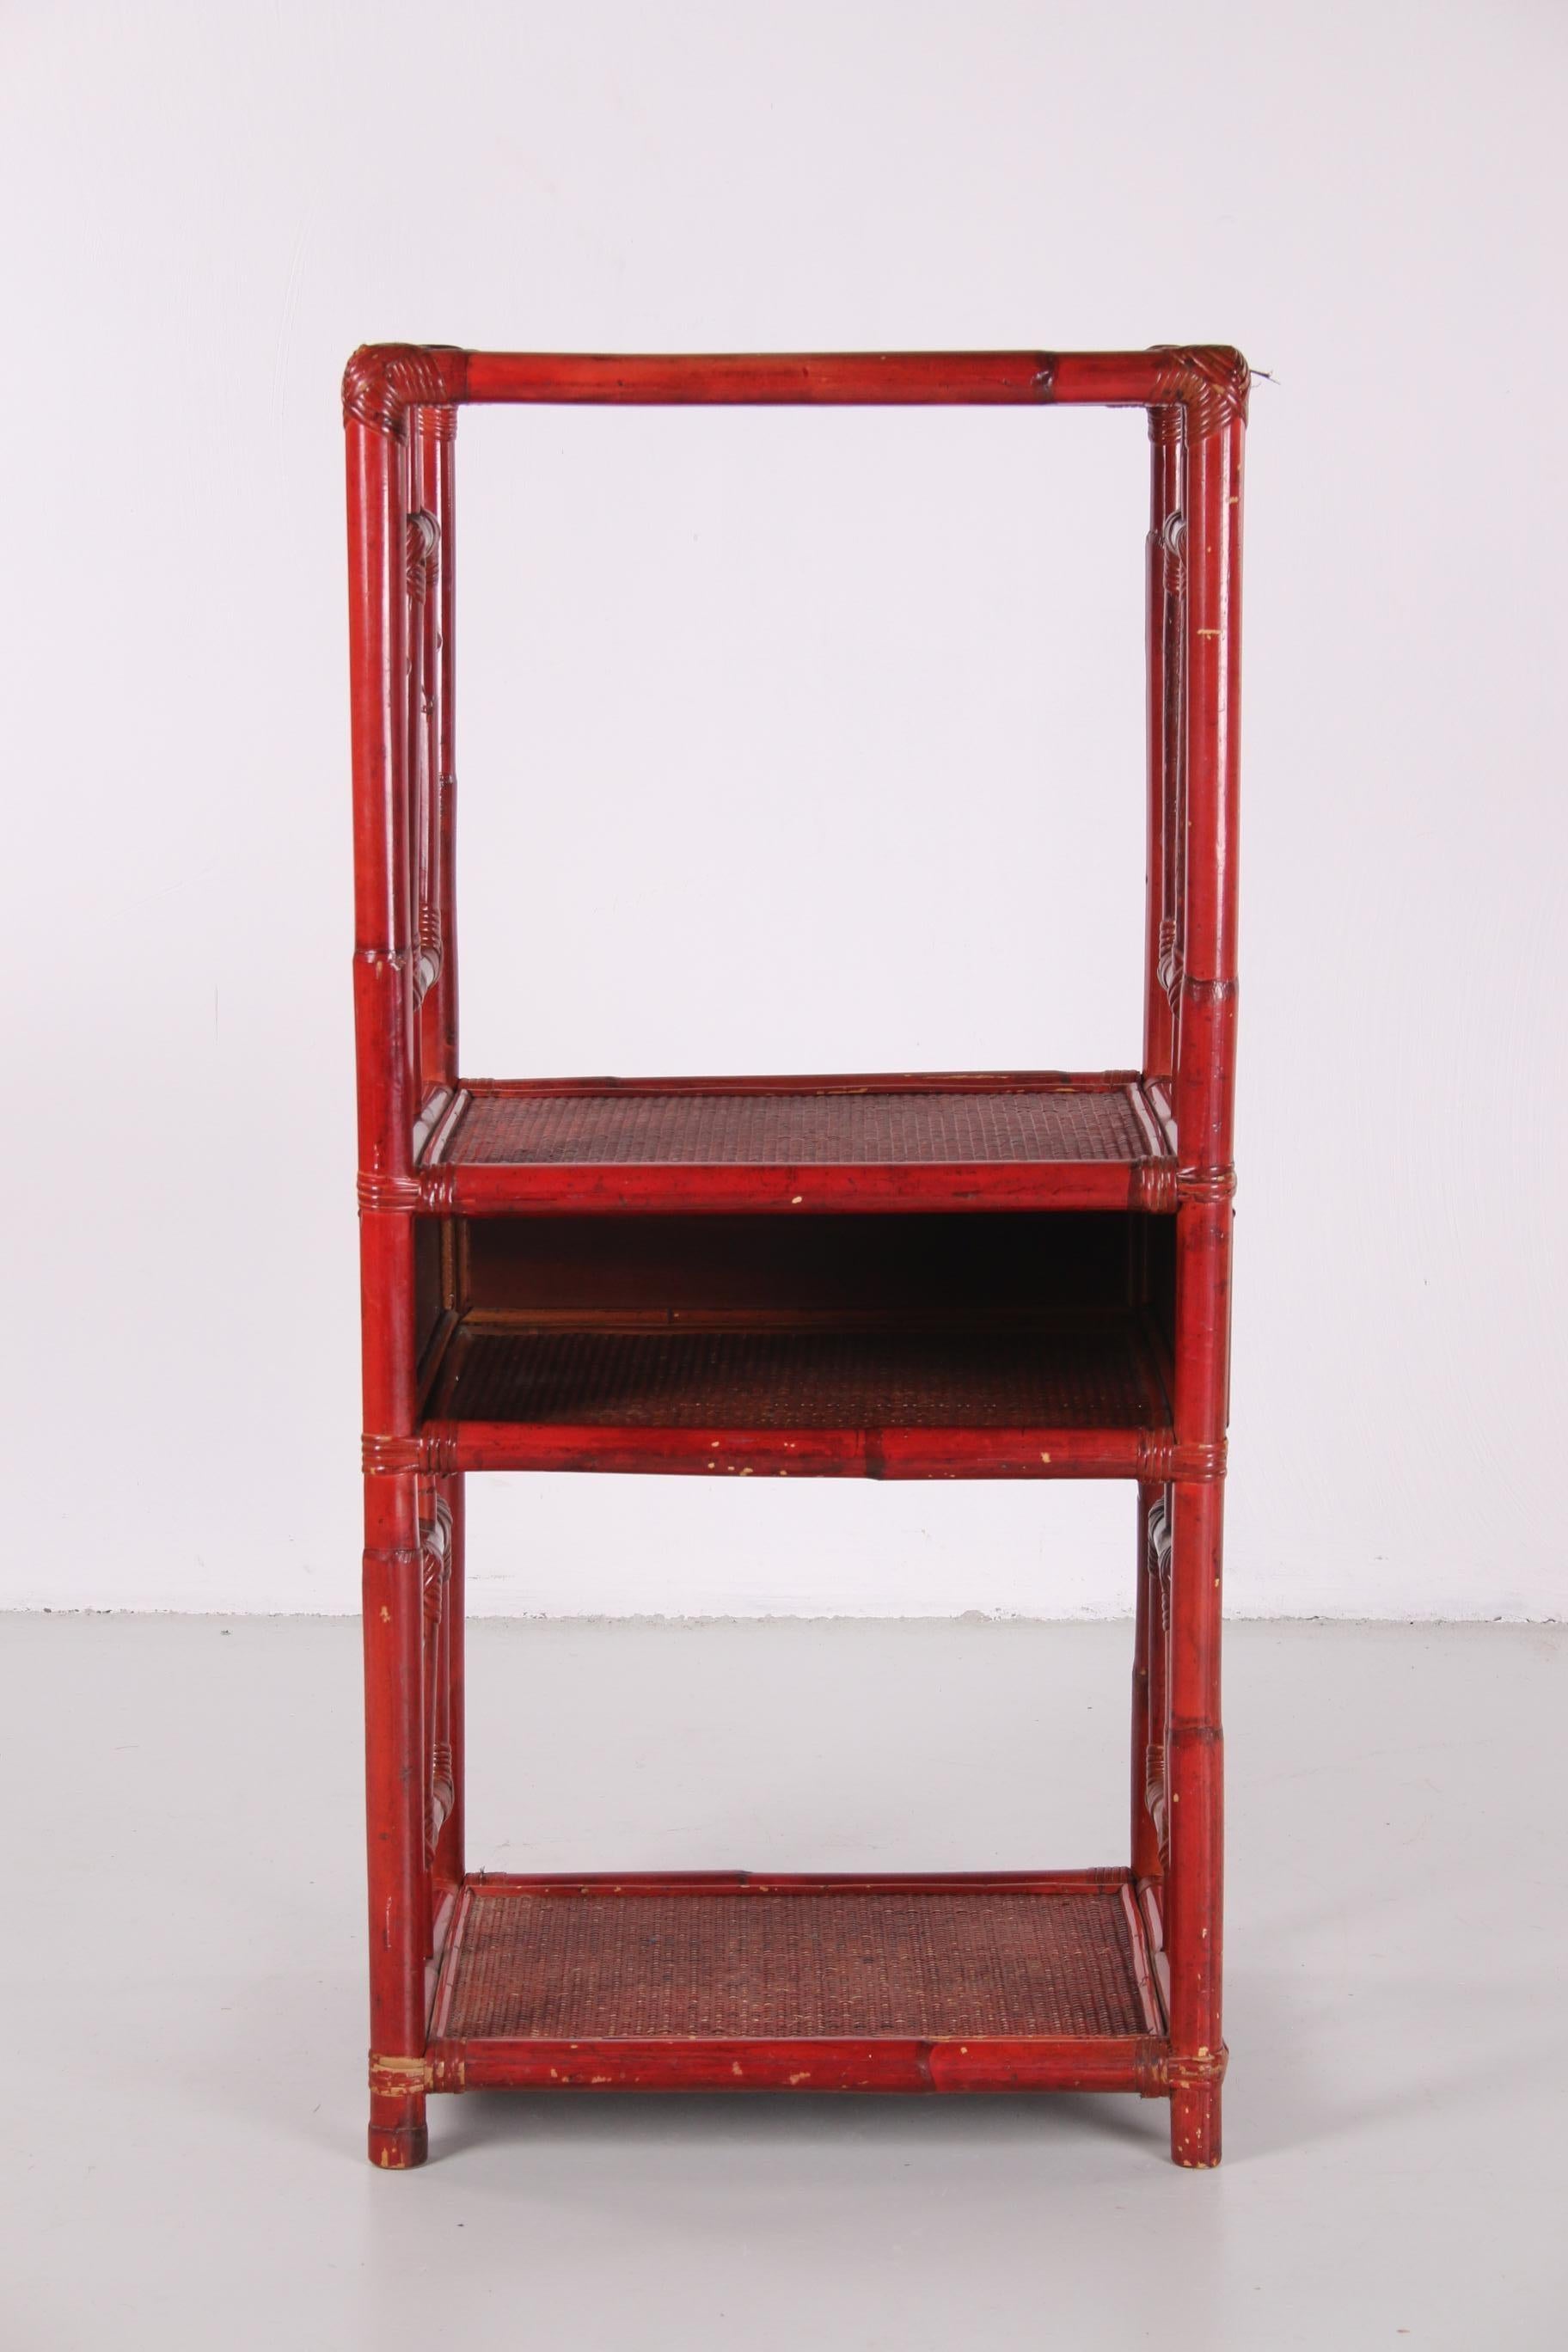 20th Century Chinese 19th Century Etagere or Room Divider Made of Bamboo, Old Red